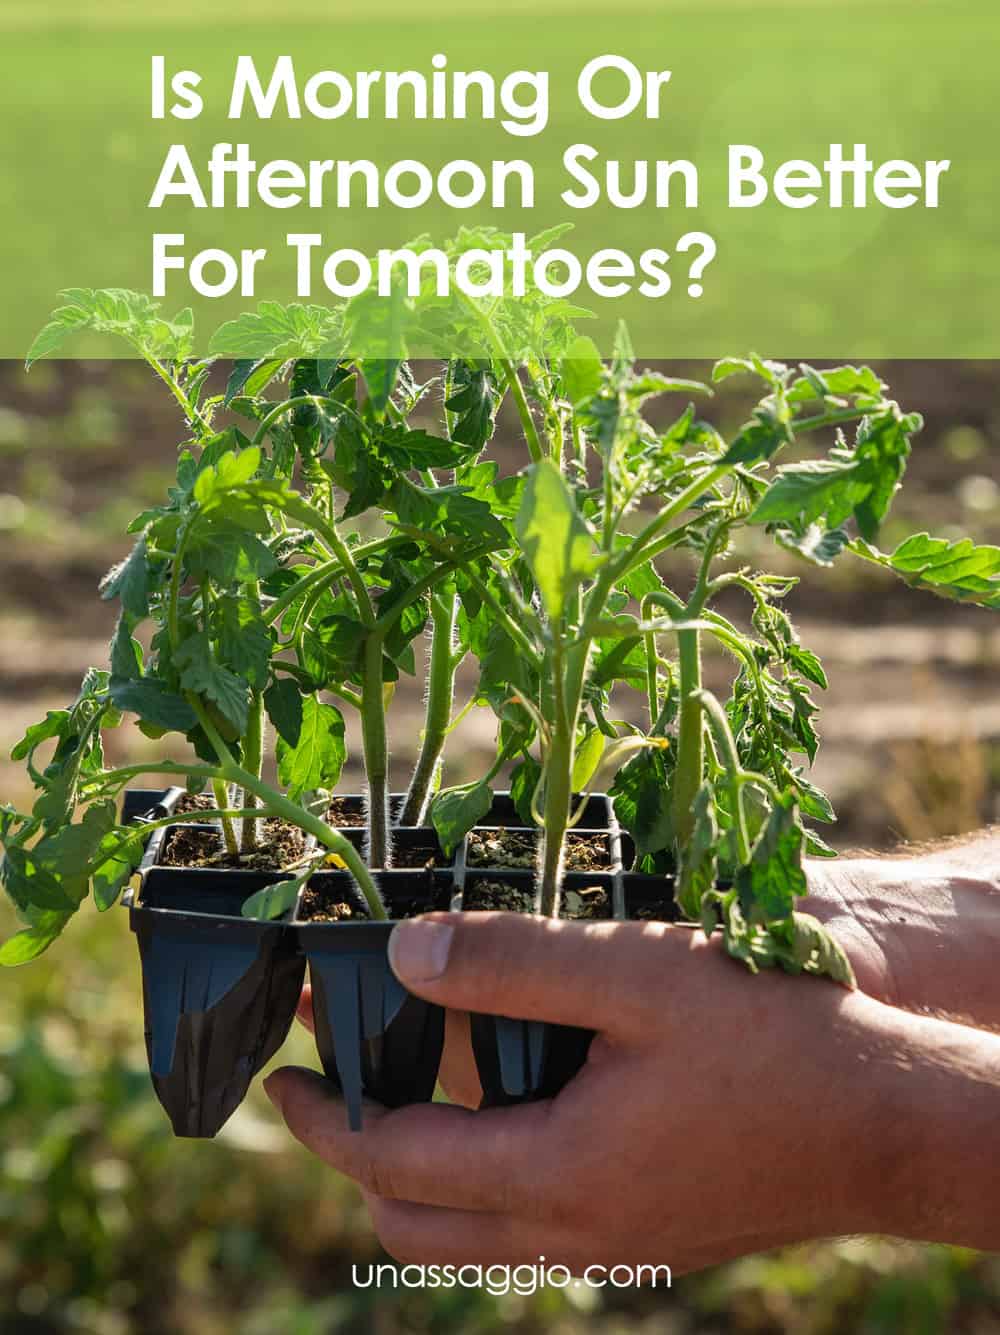 Is Morning Or Afternoon Sun Better For Tomatoes?